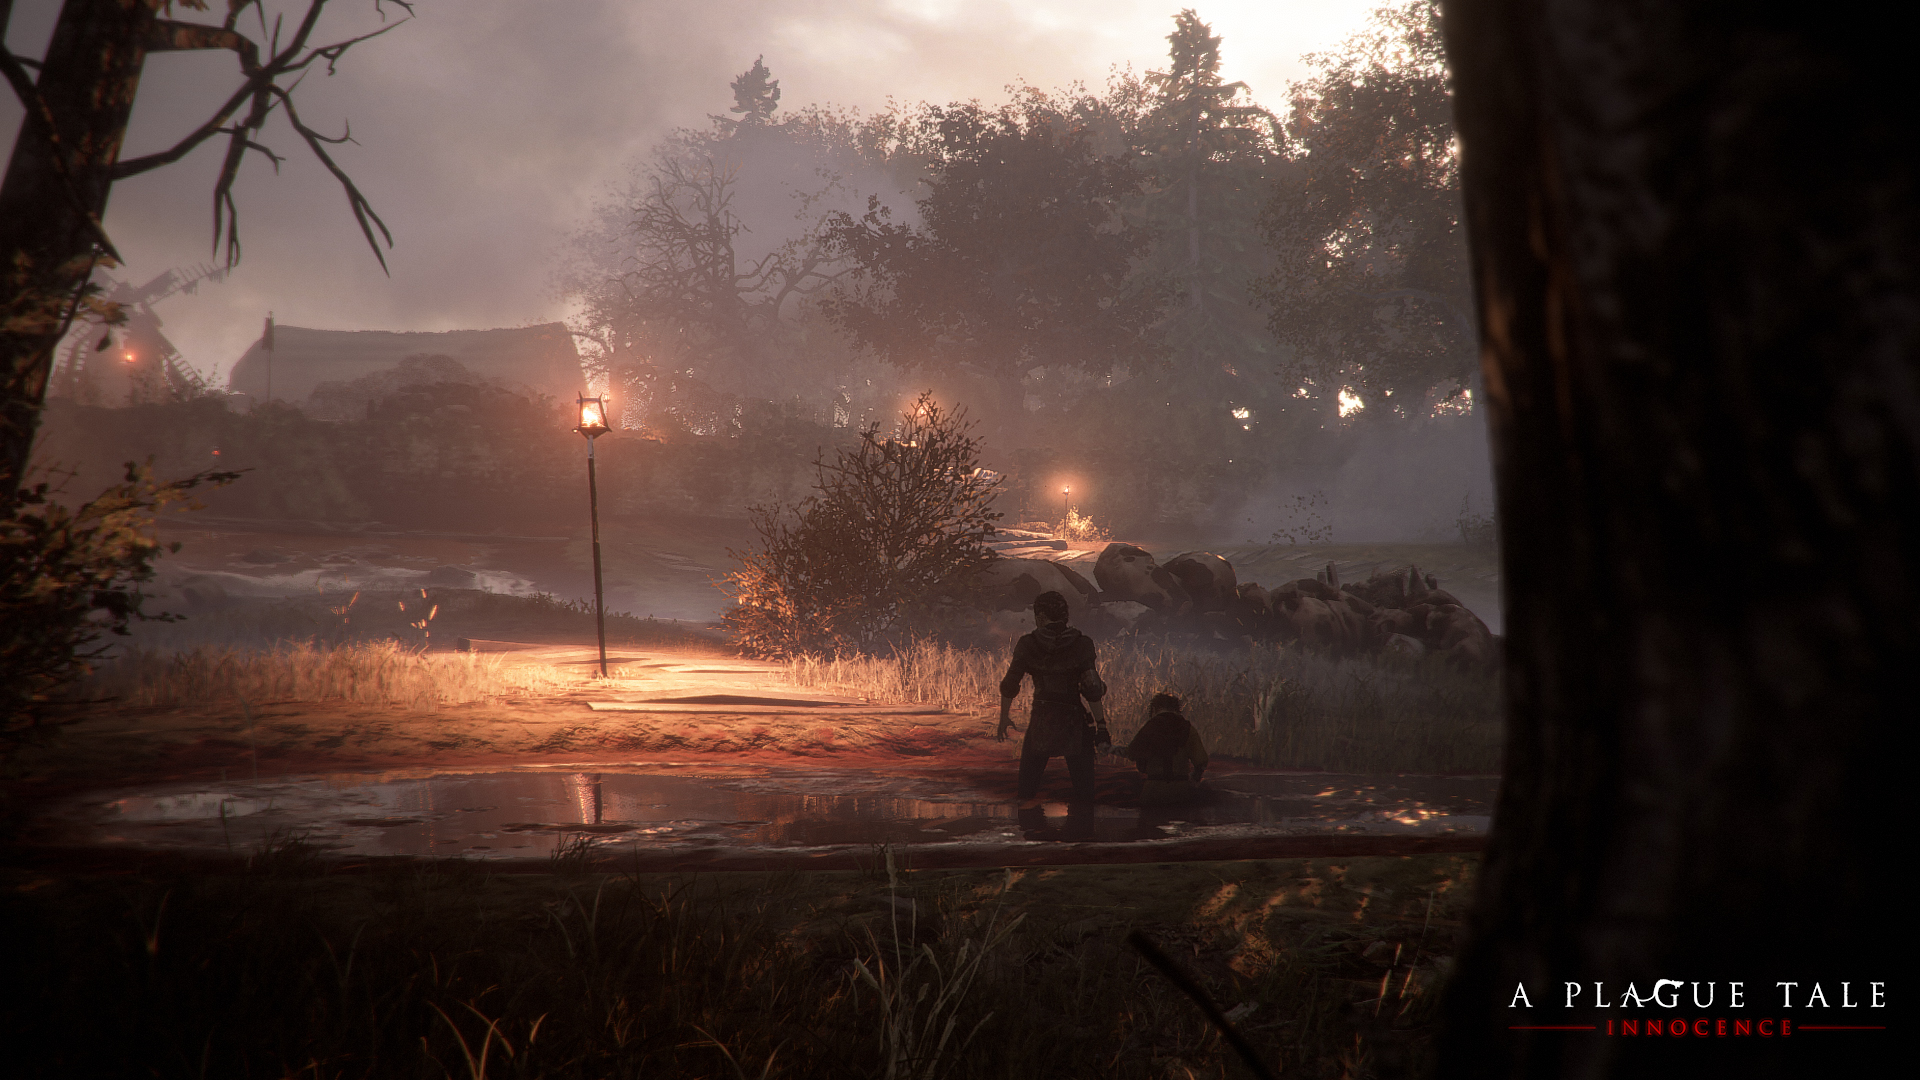 A powerful combination of art direction, action and voice acting makes 'A  Plague Tale: Innocence' a game worth your time - The Washington Post